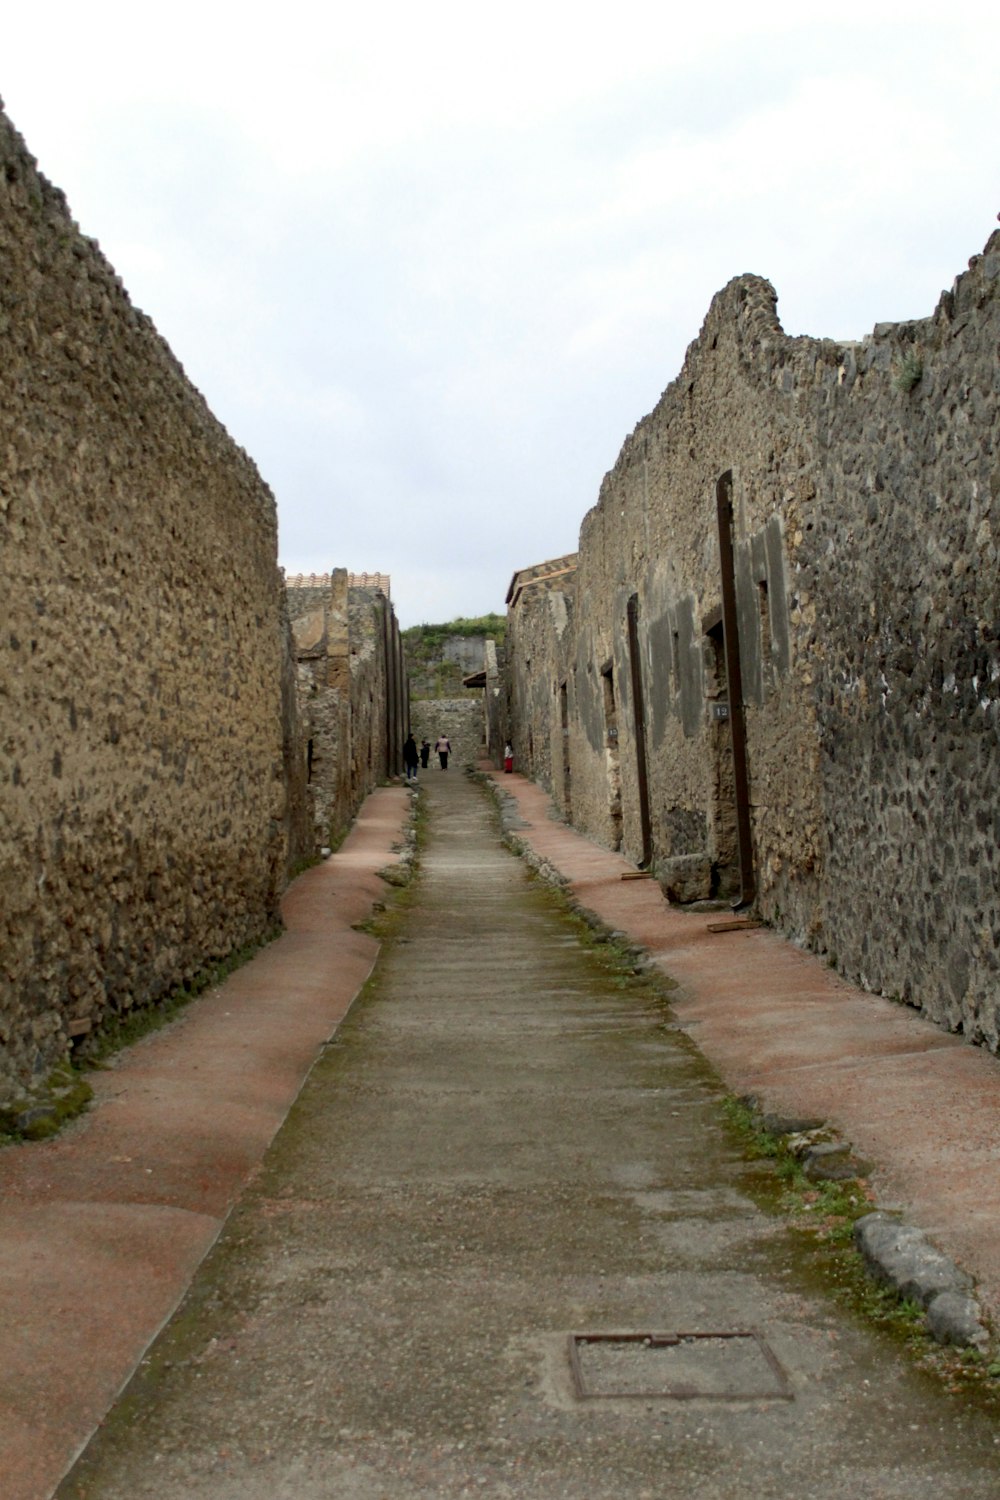 a narrow alley way with a stone building in the background